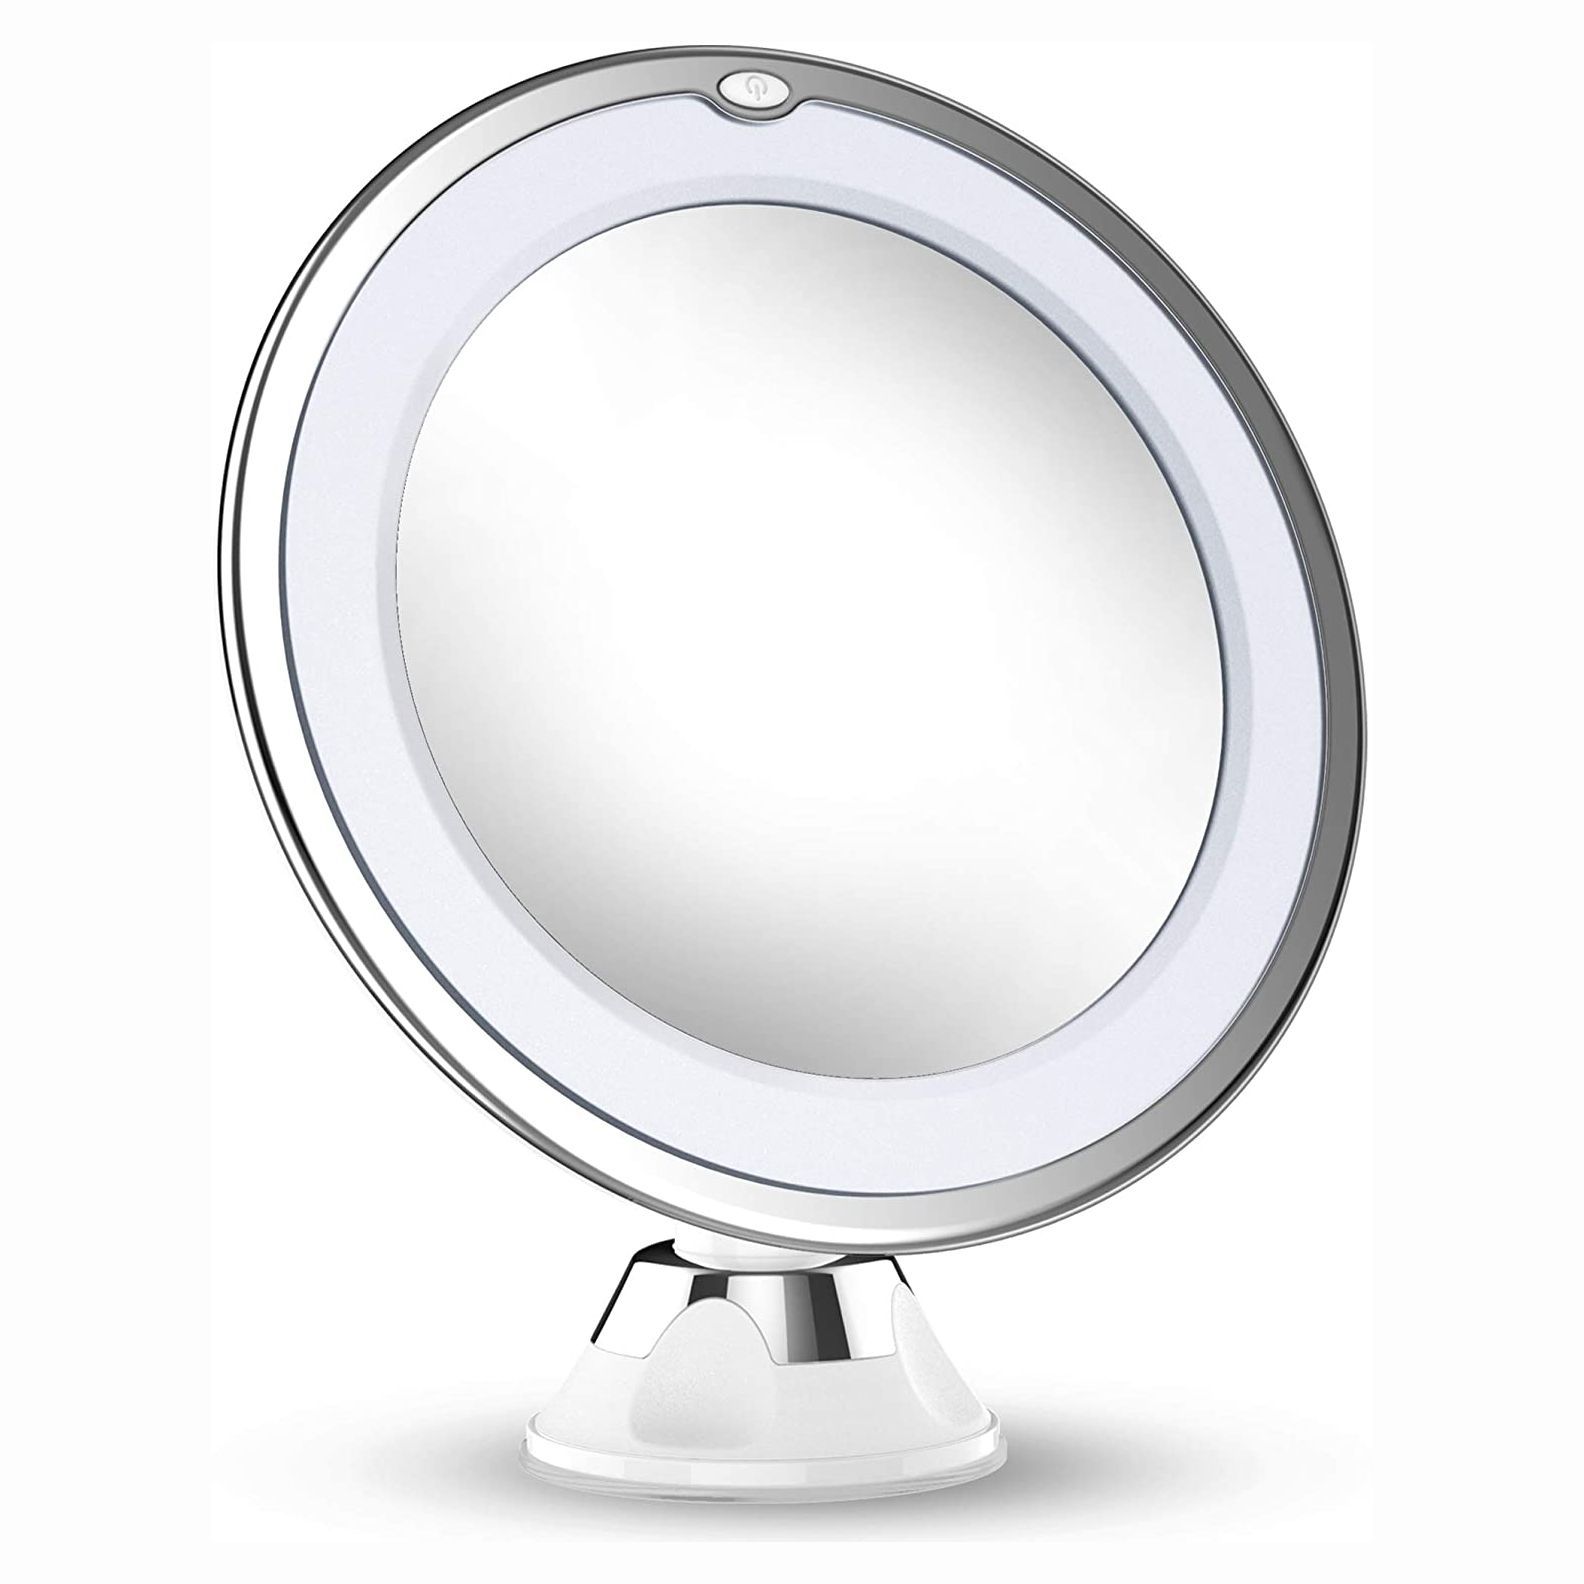 Vanity Makeup Mirrors, What Is The Highest Magnification For A Makeup Mirror